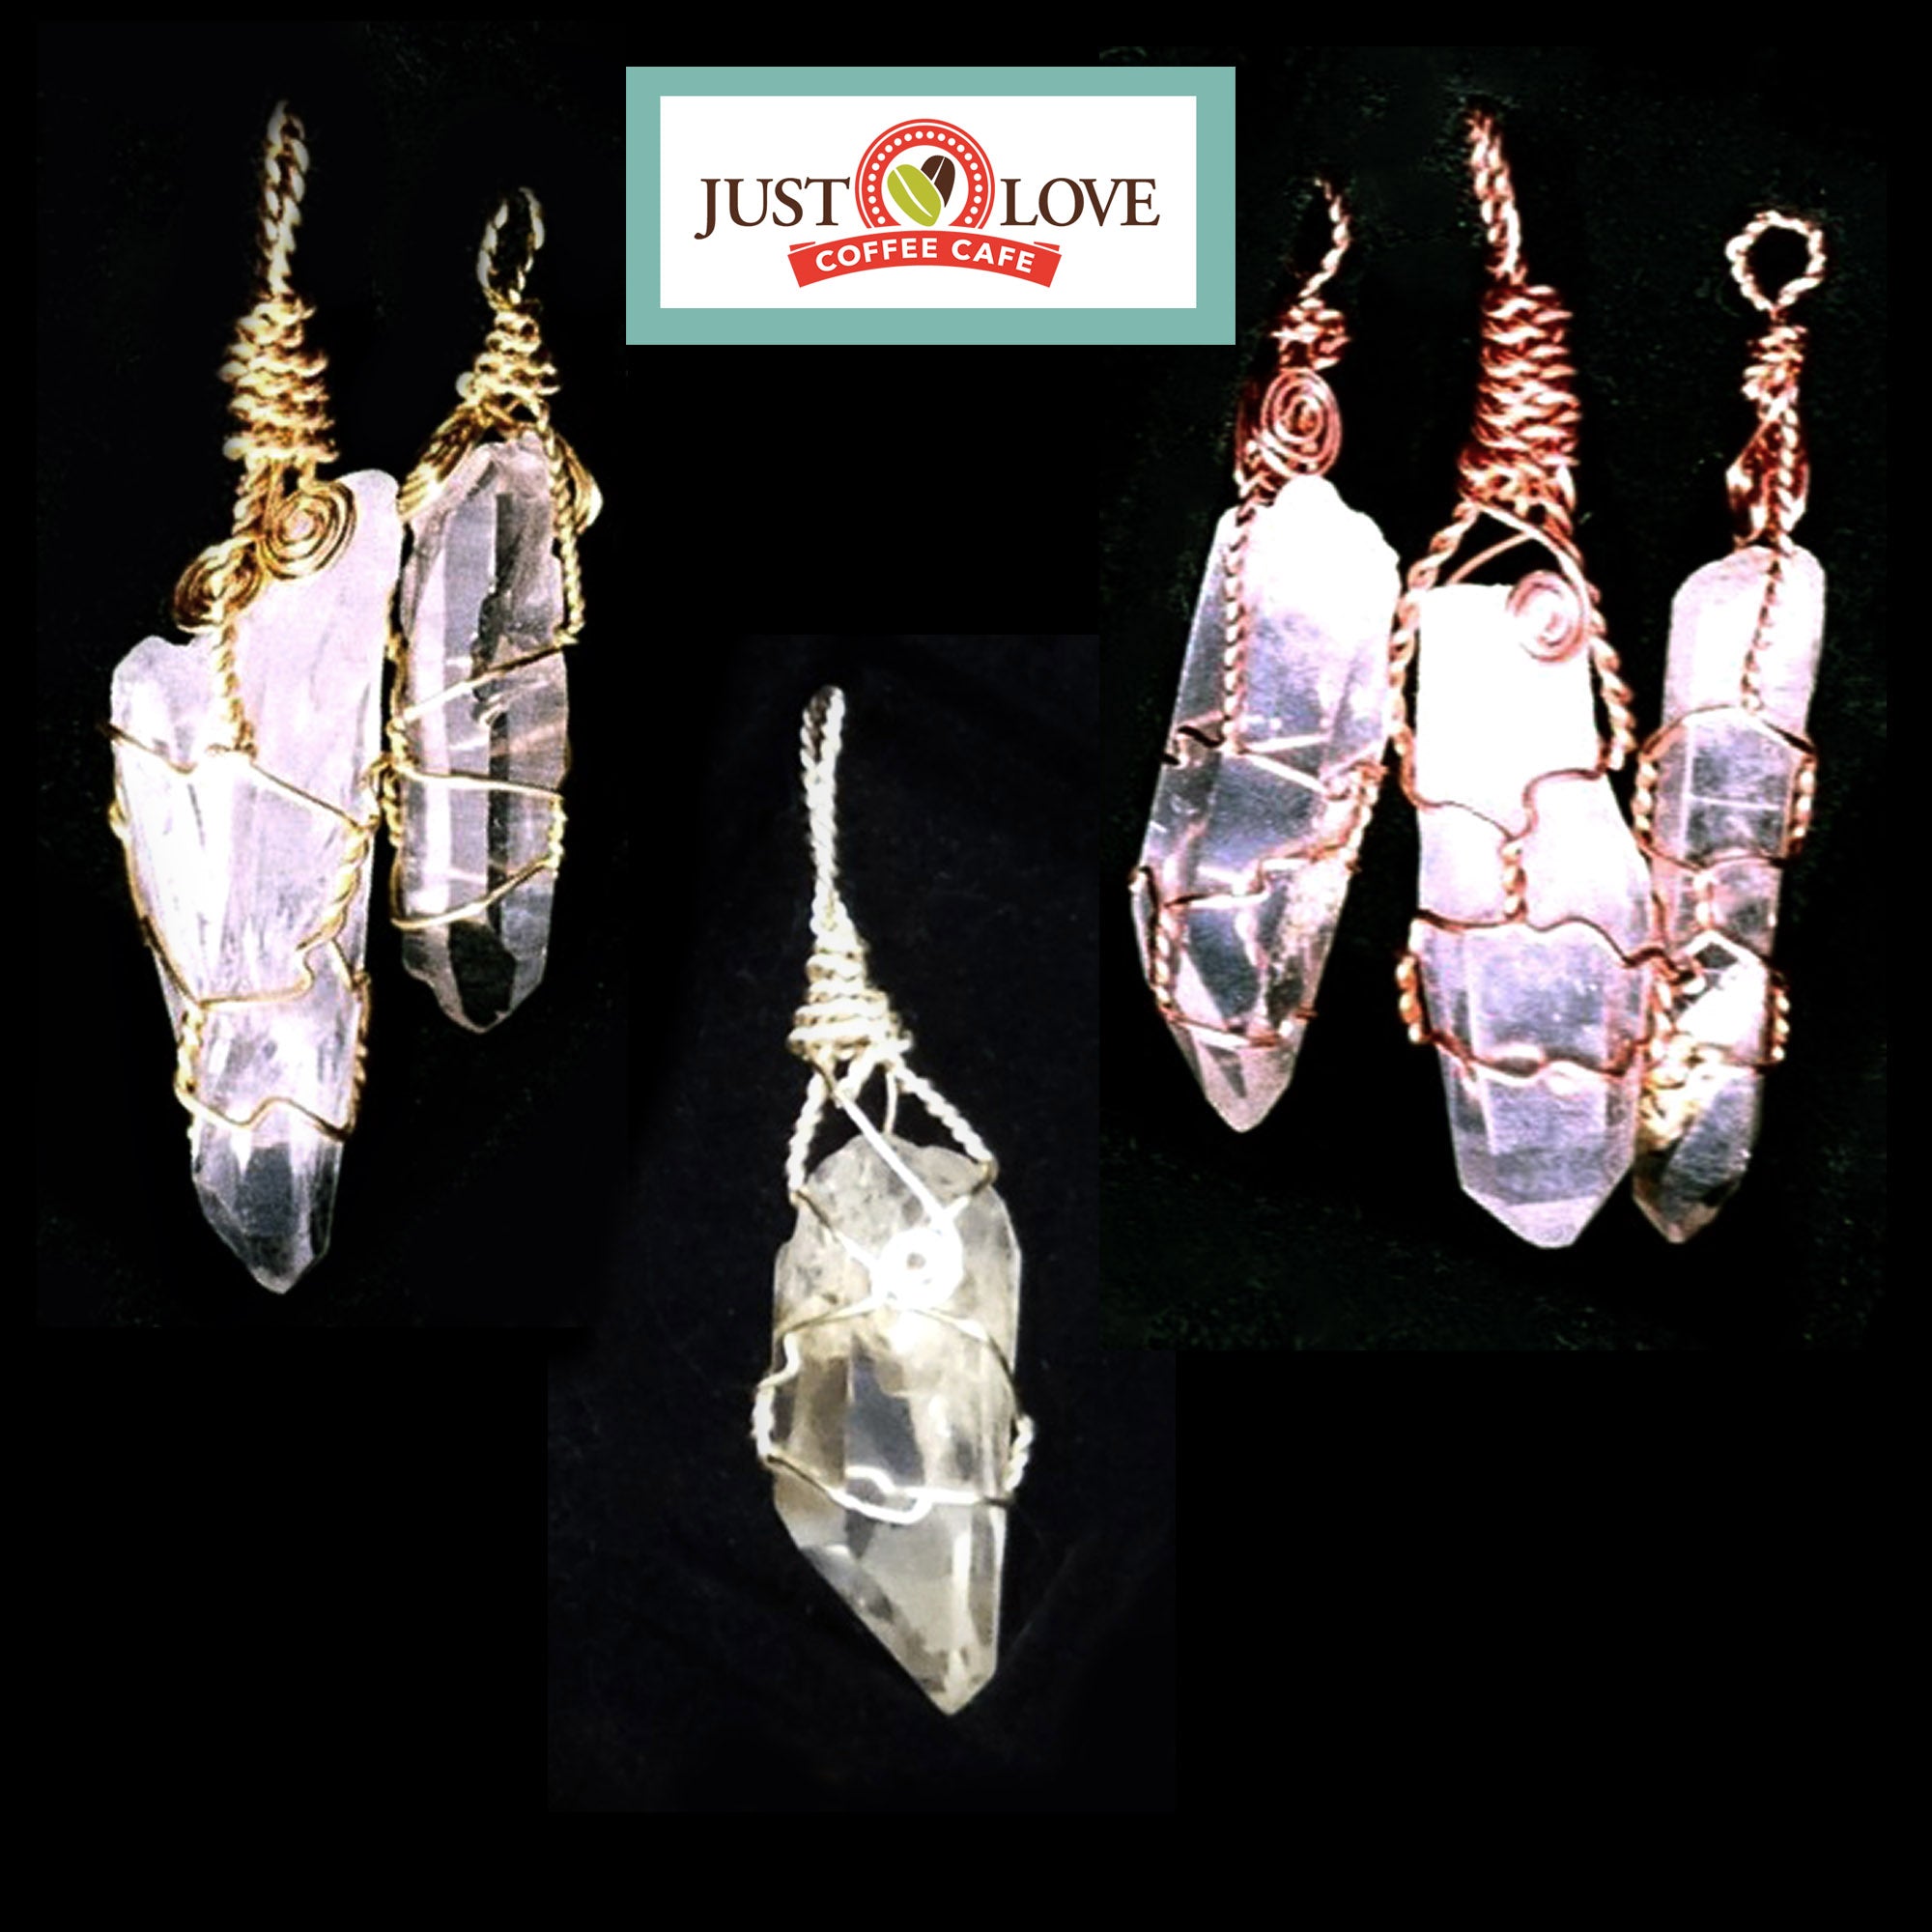 Beginner Wire Wrapping Art Class at Just Love Coffee Cafe Mon 5.13.24 @ 3:30P